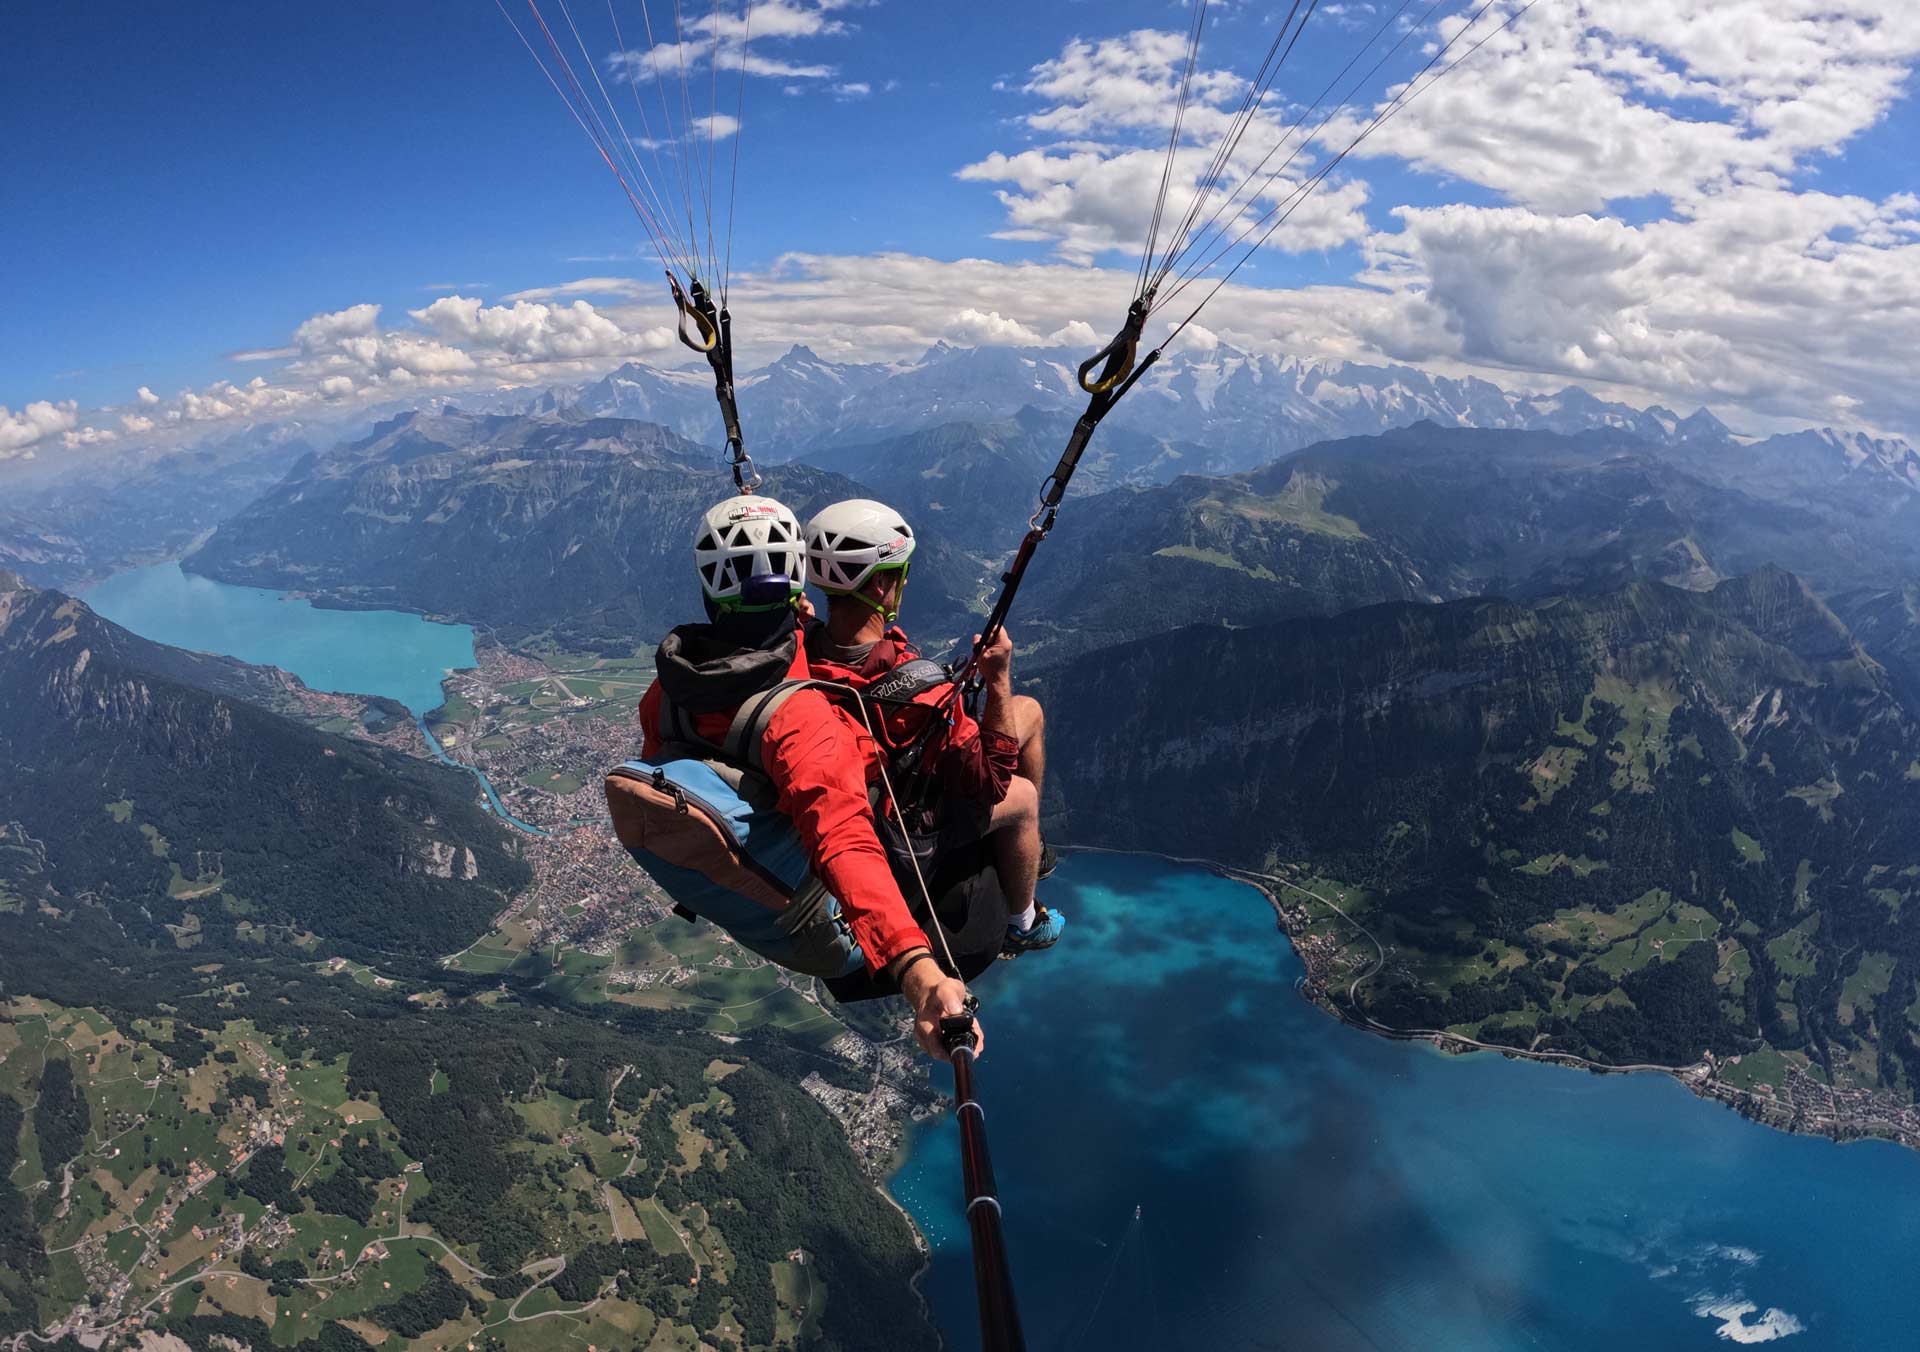 Double Airtime Paragliding Interlaken with view on both lakes